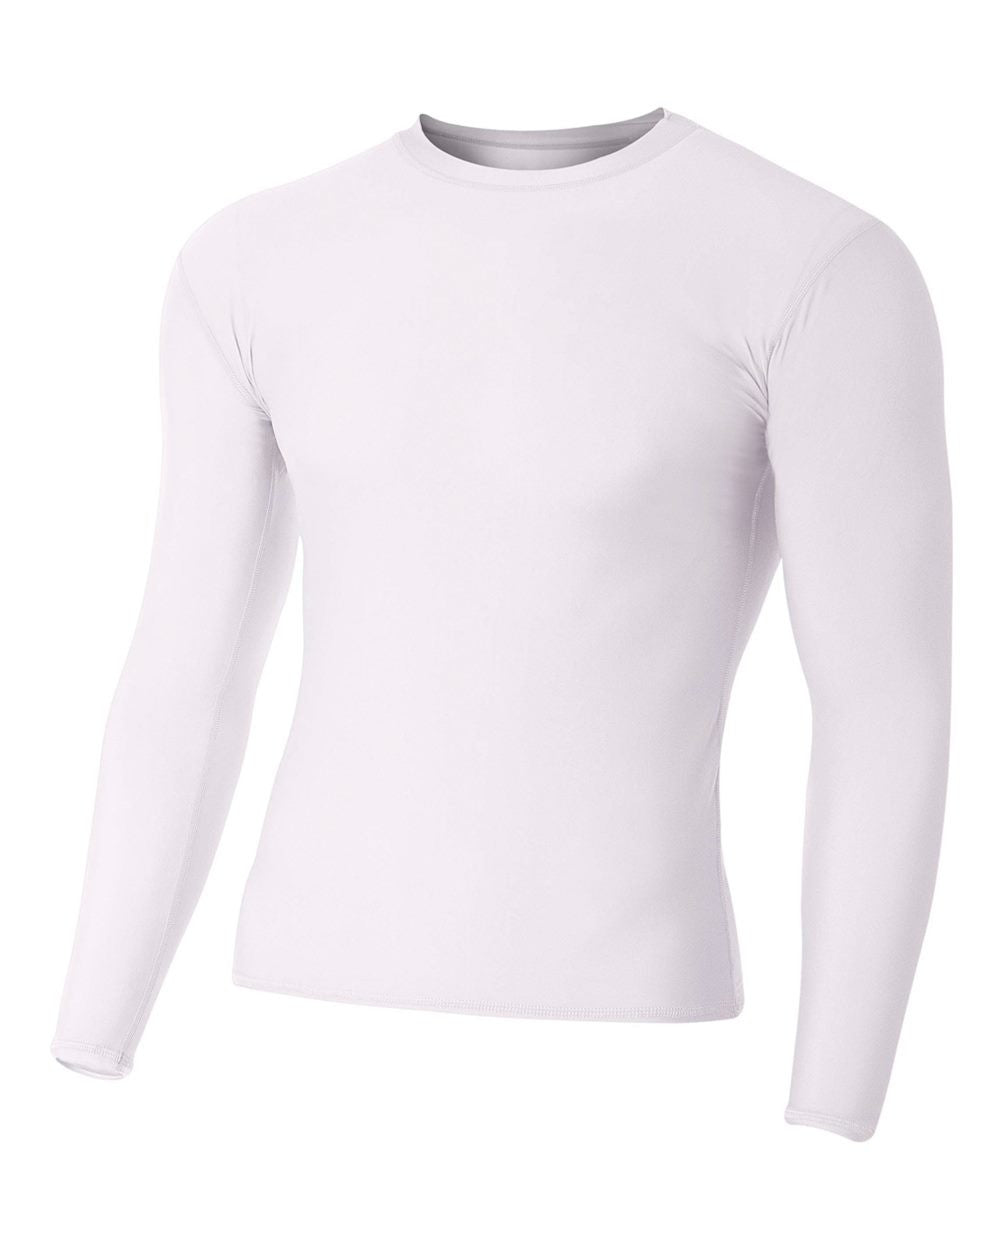 A4 Long Sleeve Cooling Performance Crew Training Wear White Mens Small - Third Coast Soccer